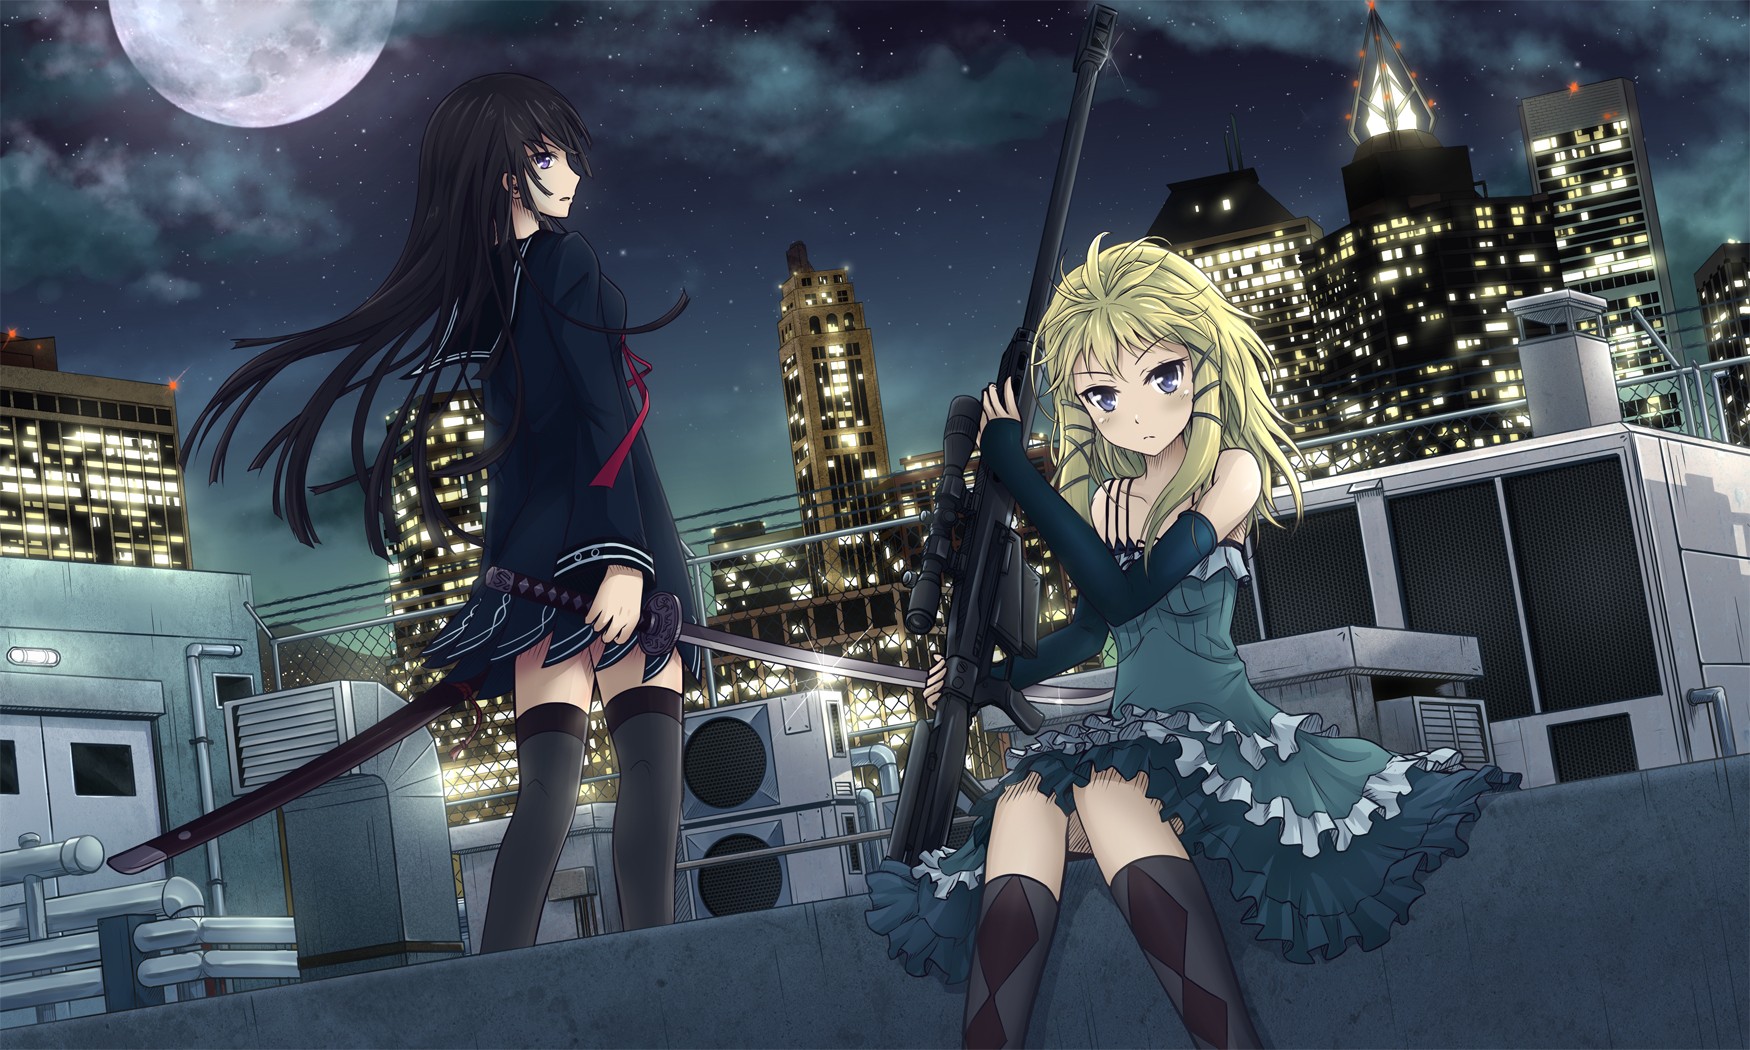 Anime 1750x1050 Black Bullet Tina Sprout Kisara Tendo  anime girls anime sniper rifle two women Moon rooftopping girls with guns women with swords weapon blonde black hair sky stockings knees together standing sitting dress long hair katana rifles